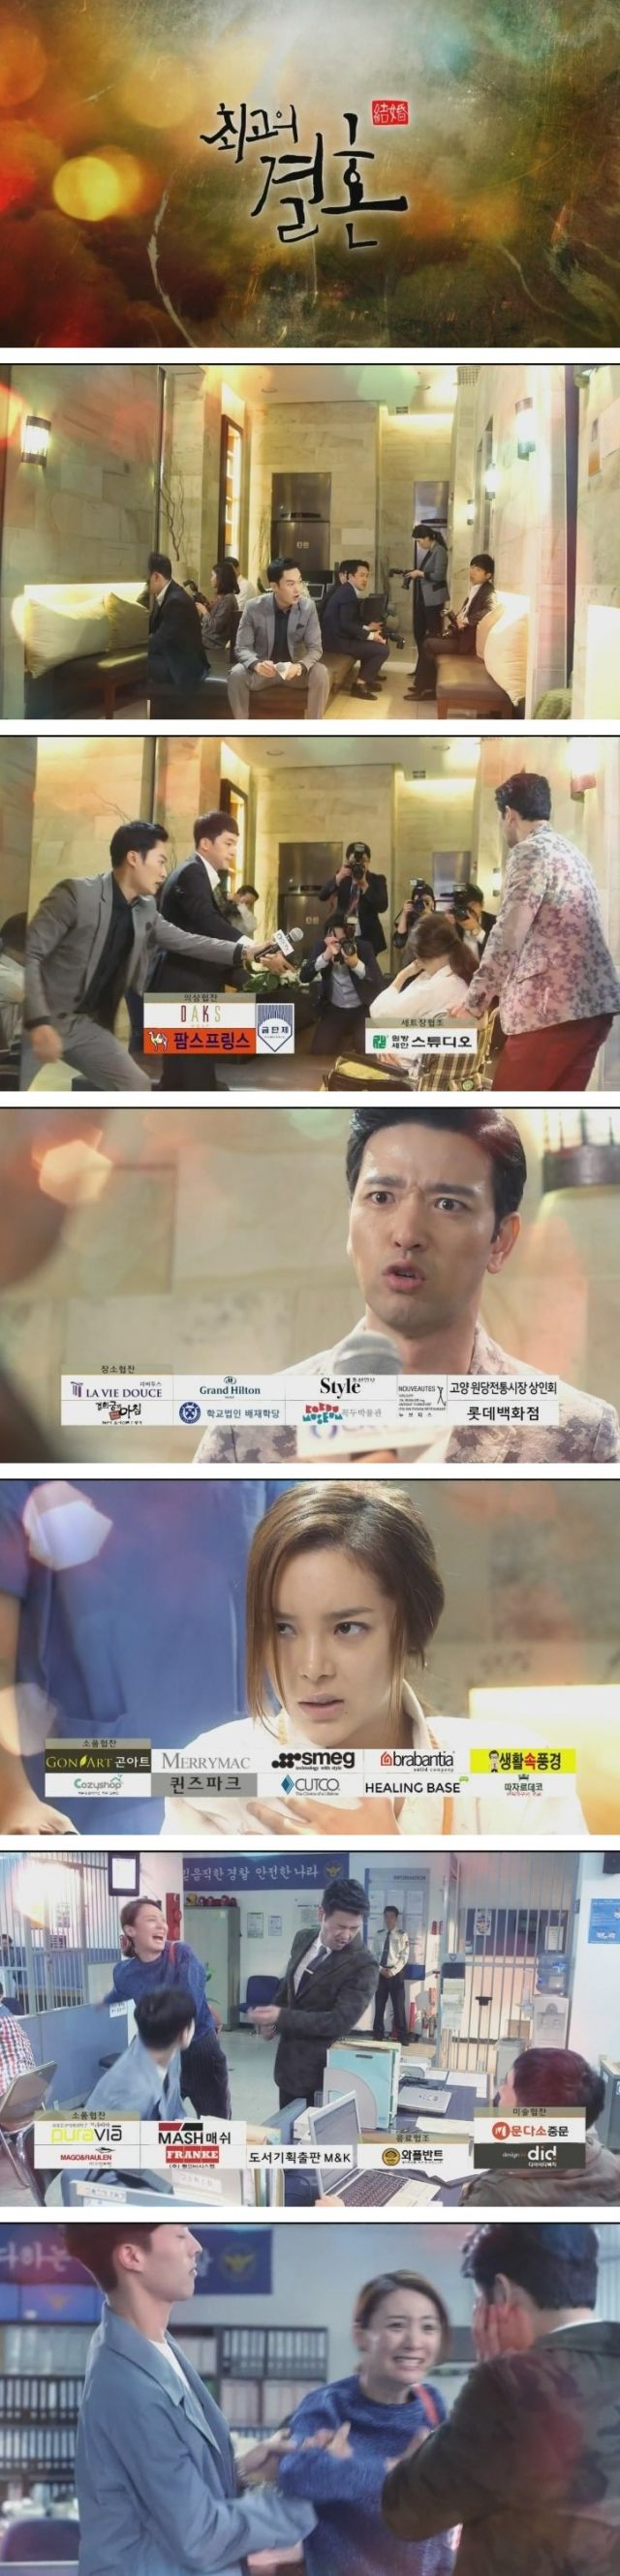 episodes 9 and 10 captures for the Korean drama 'Greatest Marriage'